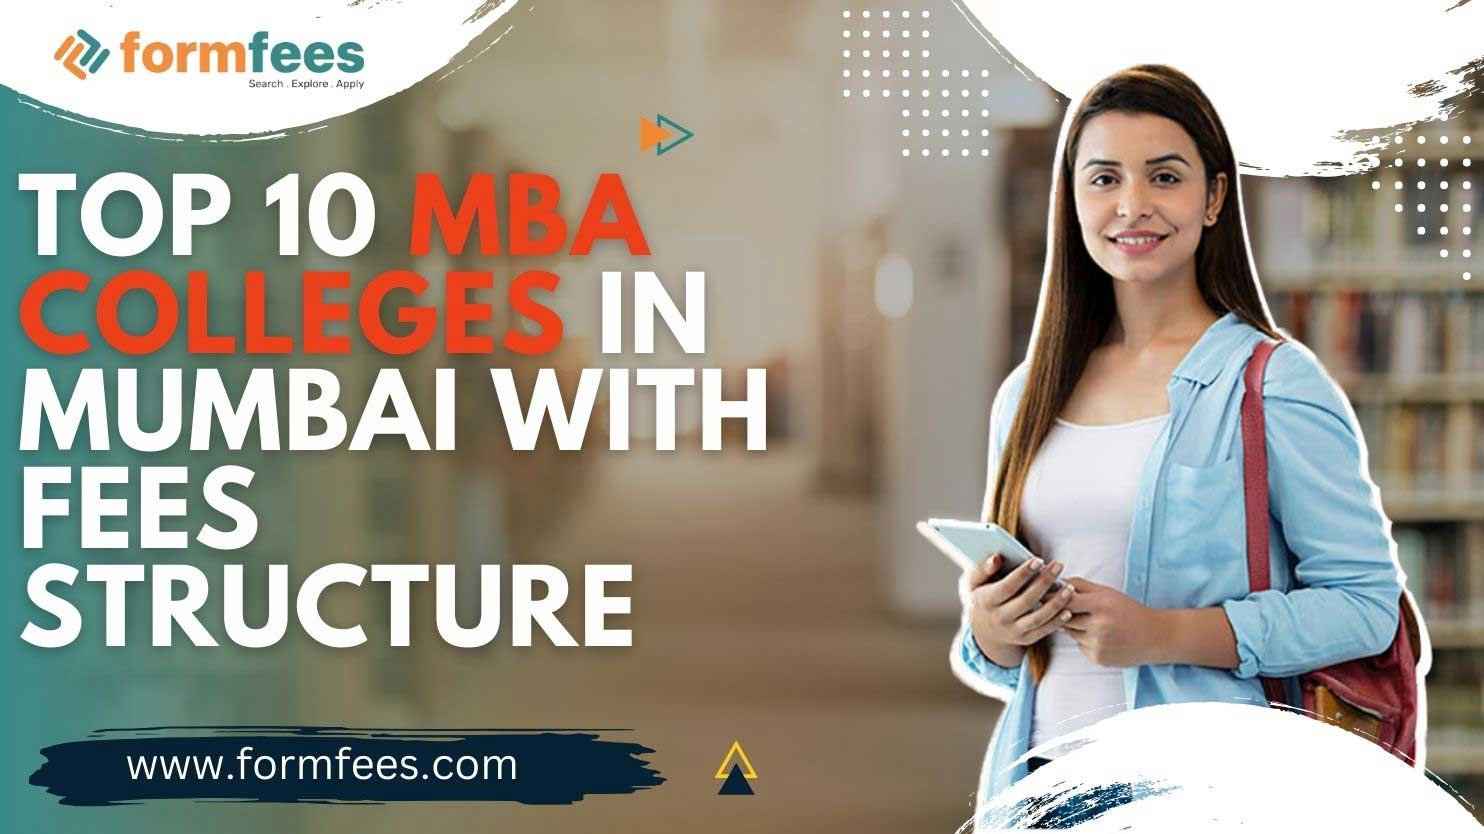 Top 10 MBA colleges in Mumbai with fees structure